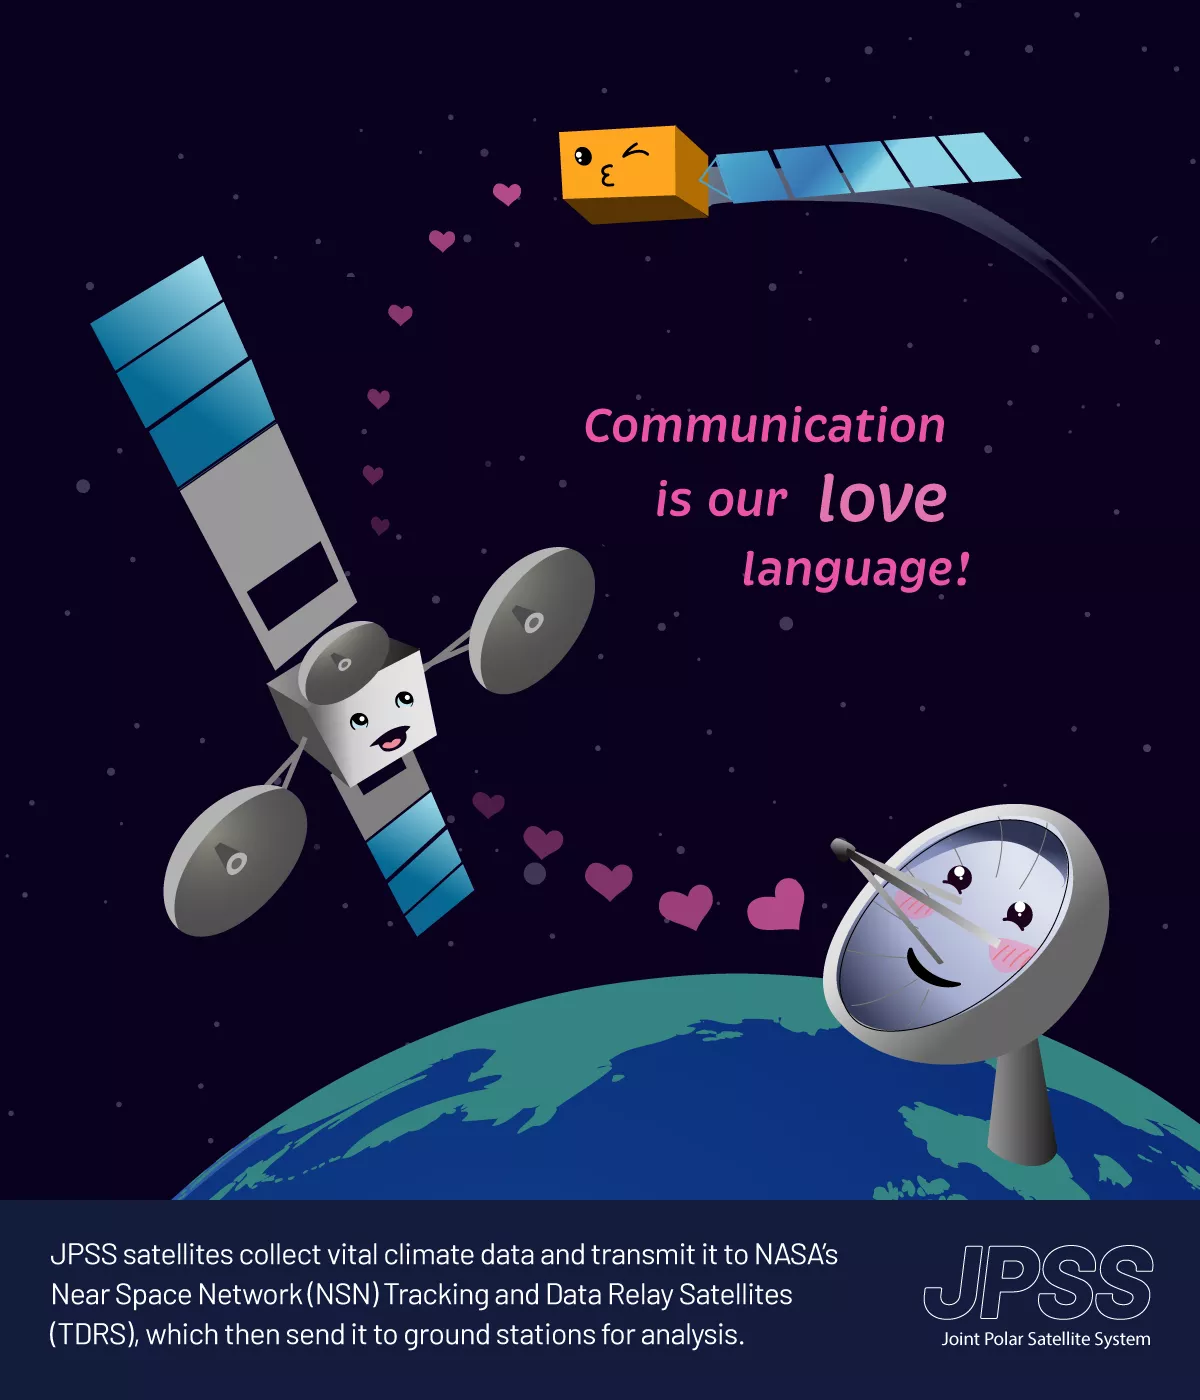 A Valentine's Day card featuring an illustration of two satellites with expressive faces against the backdrop of space. In the top right corner, a cube-shaped satellite with a winking expression, symbolizing a JPSS satellite, sends a trail of pink hearts toward a larger, smiling satellite on the left side of the card, which represents the NASA Near Space Network (NSN) Tracking and Data Relay Satellite (TDRS). This larger satellite is depicted relaying the hearts down to a ground-based satellite dish on Eart